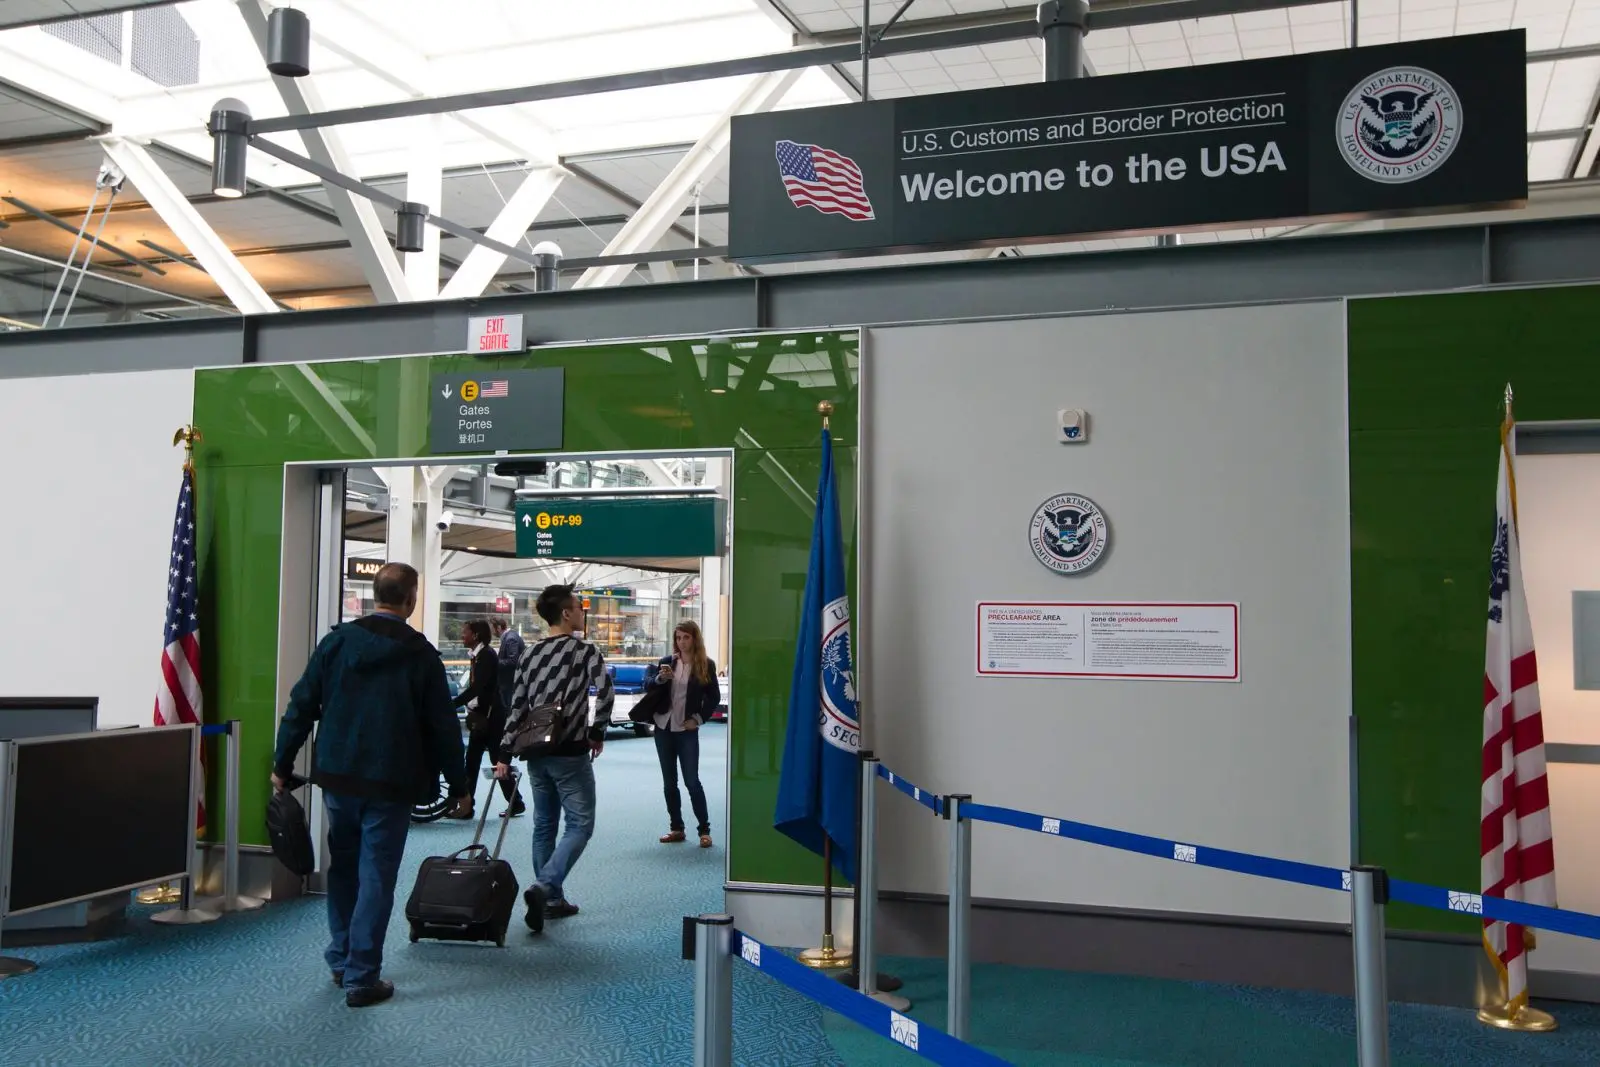 U.S. Customs and Border Protection (CBP) preclearance operations